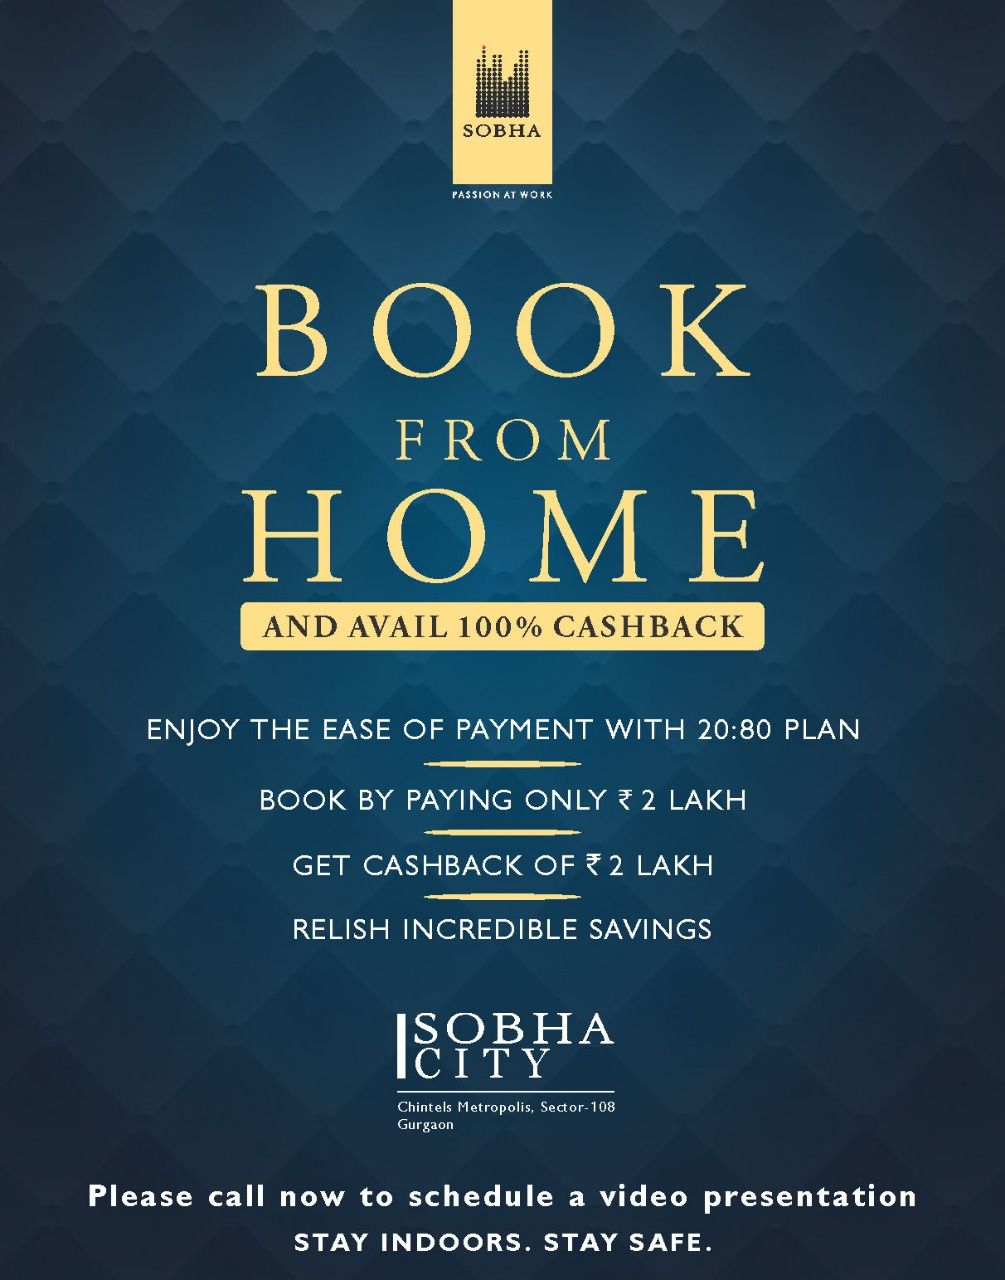 20:80 payment plan at Sobha City in Sector 108, Gurgaon Update